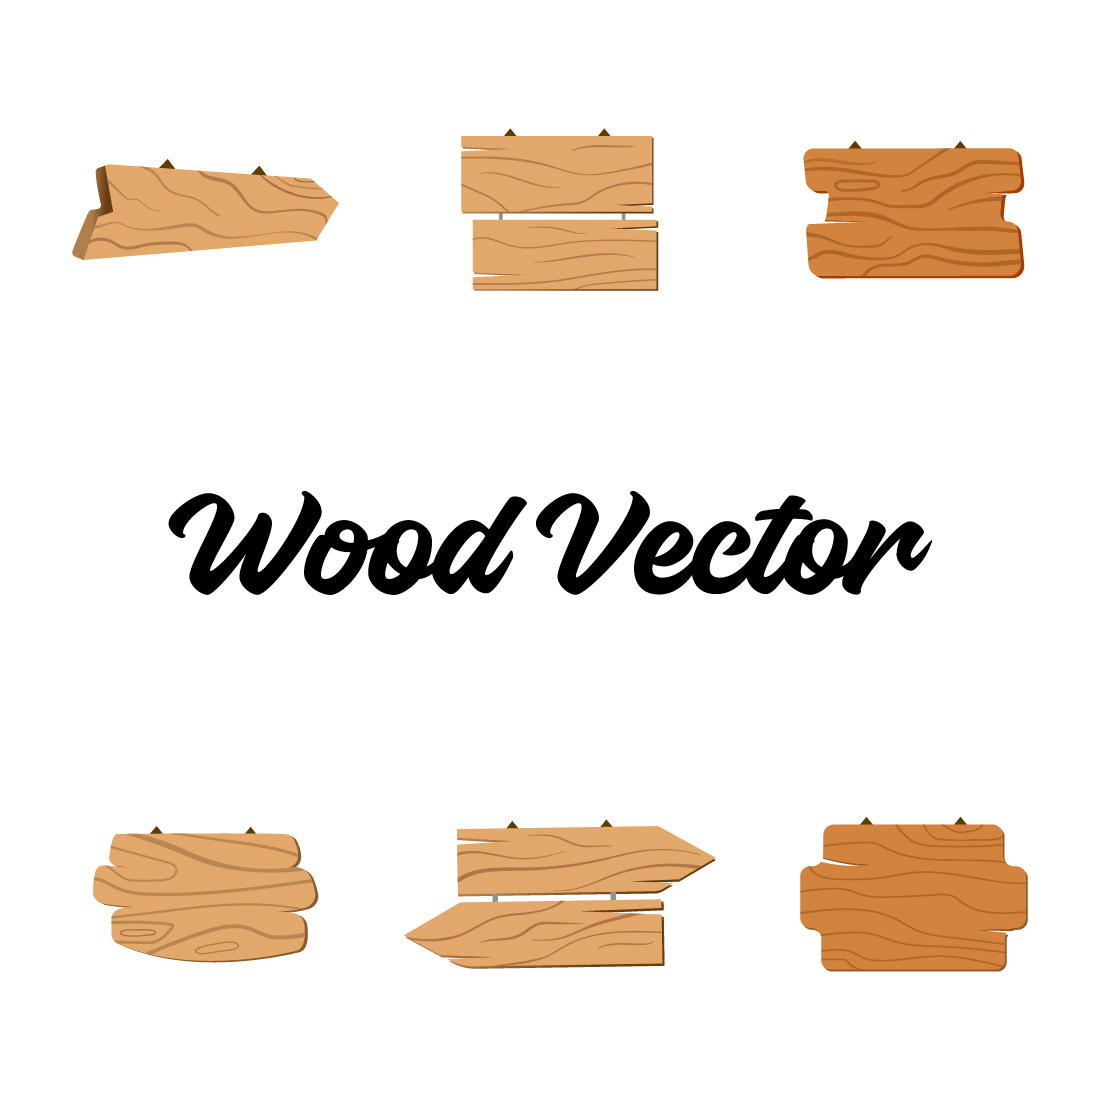 This is a wooden vector design Only $11 preview image.